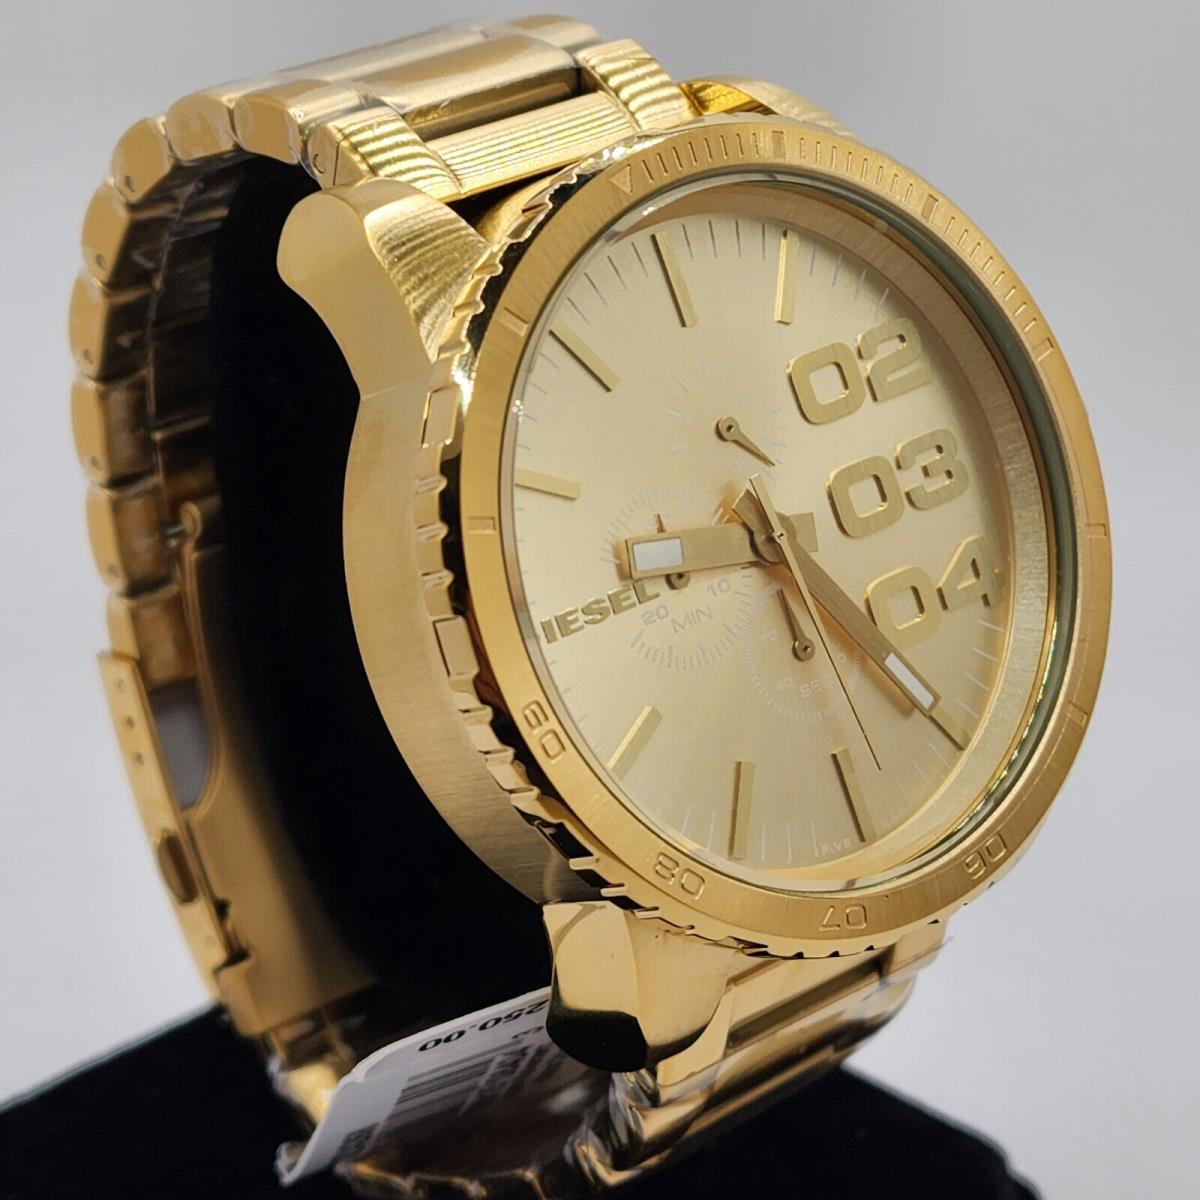 Diesel Men`s Watch Double Down 51 Gold Tone Stainless Steel Chronograph DZ4268 - Dial: Gold, Band: Gold, Bezel: Gold